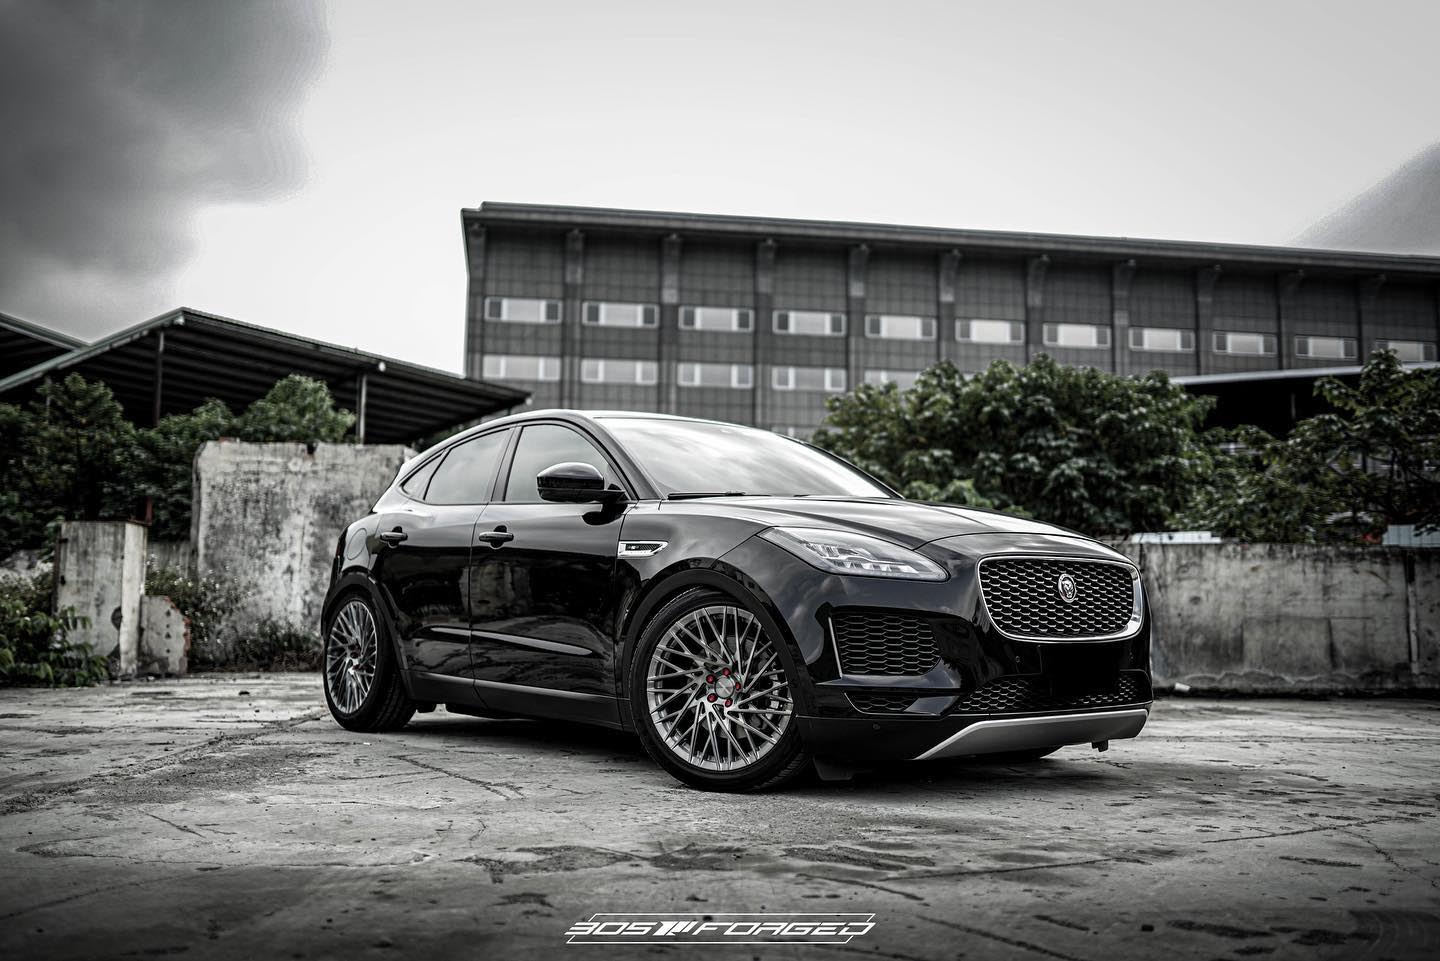 Jaguar E-Pace with 20-inch 305 Forged UF119